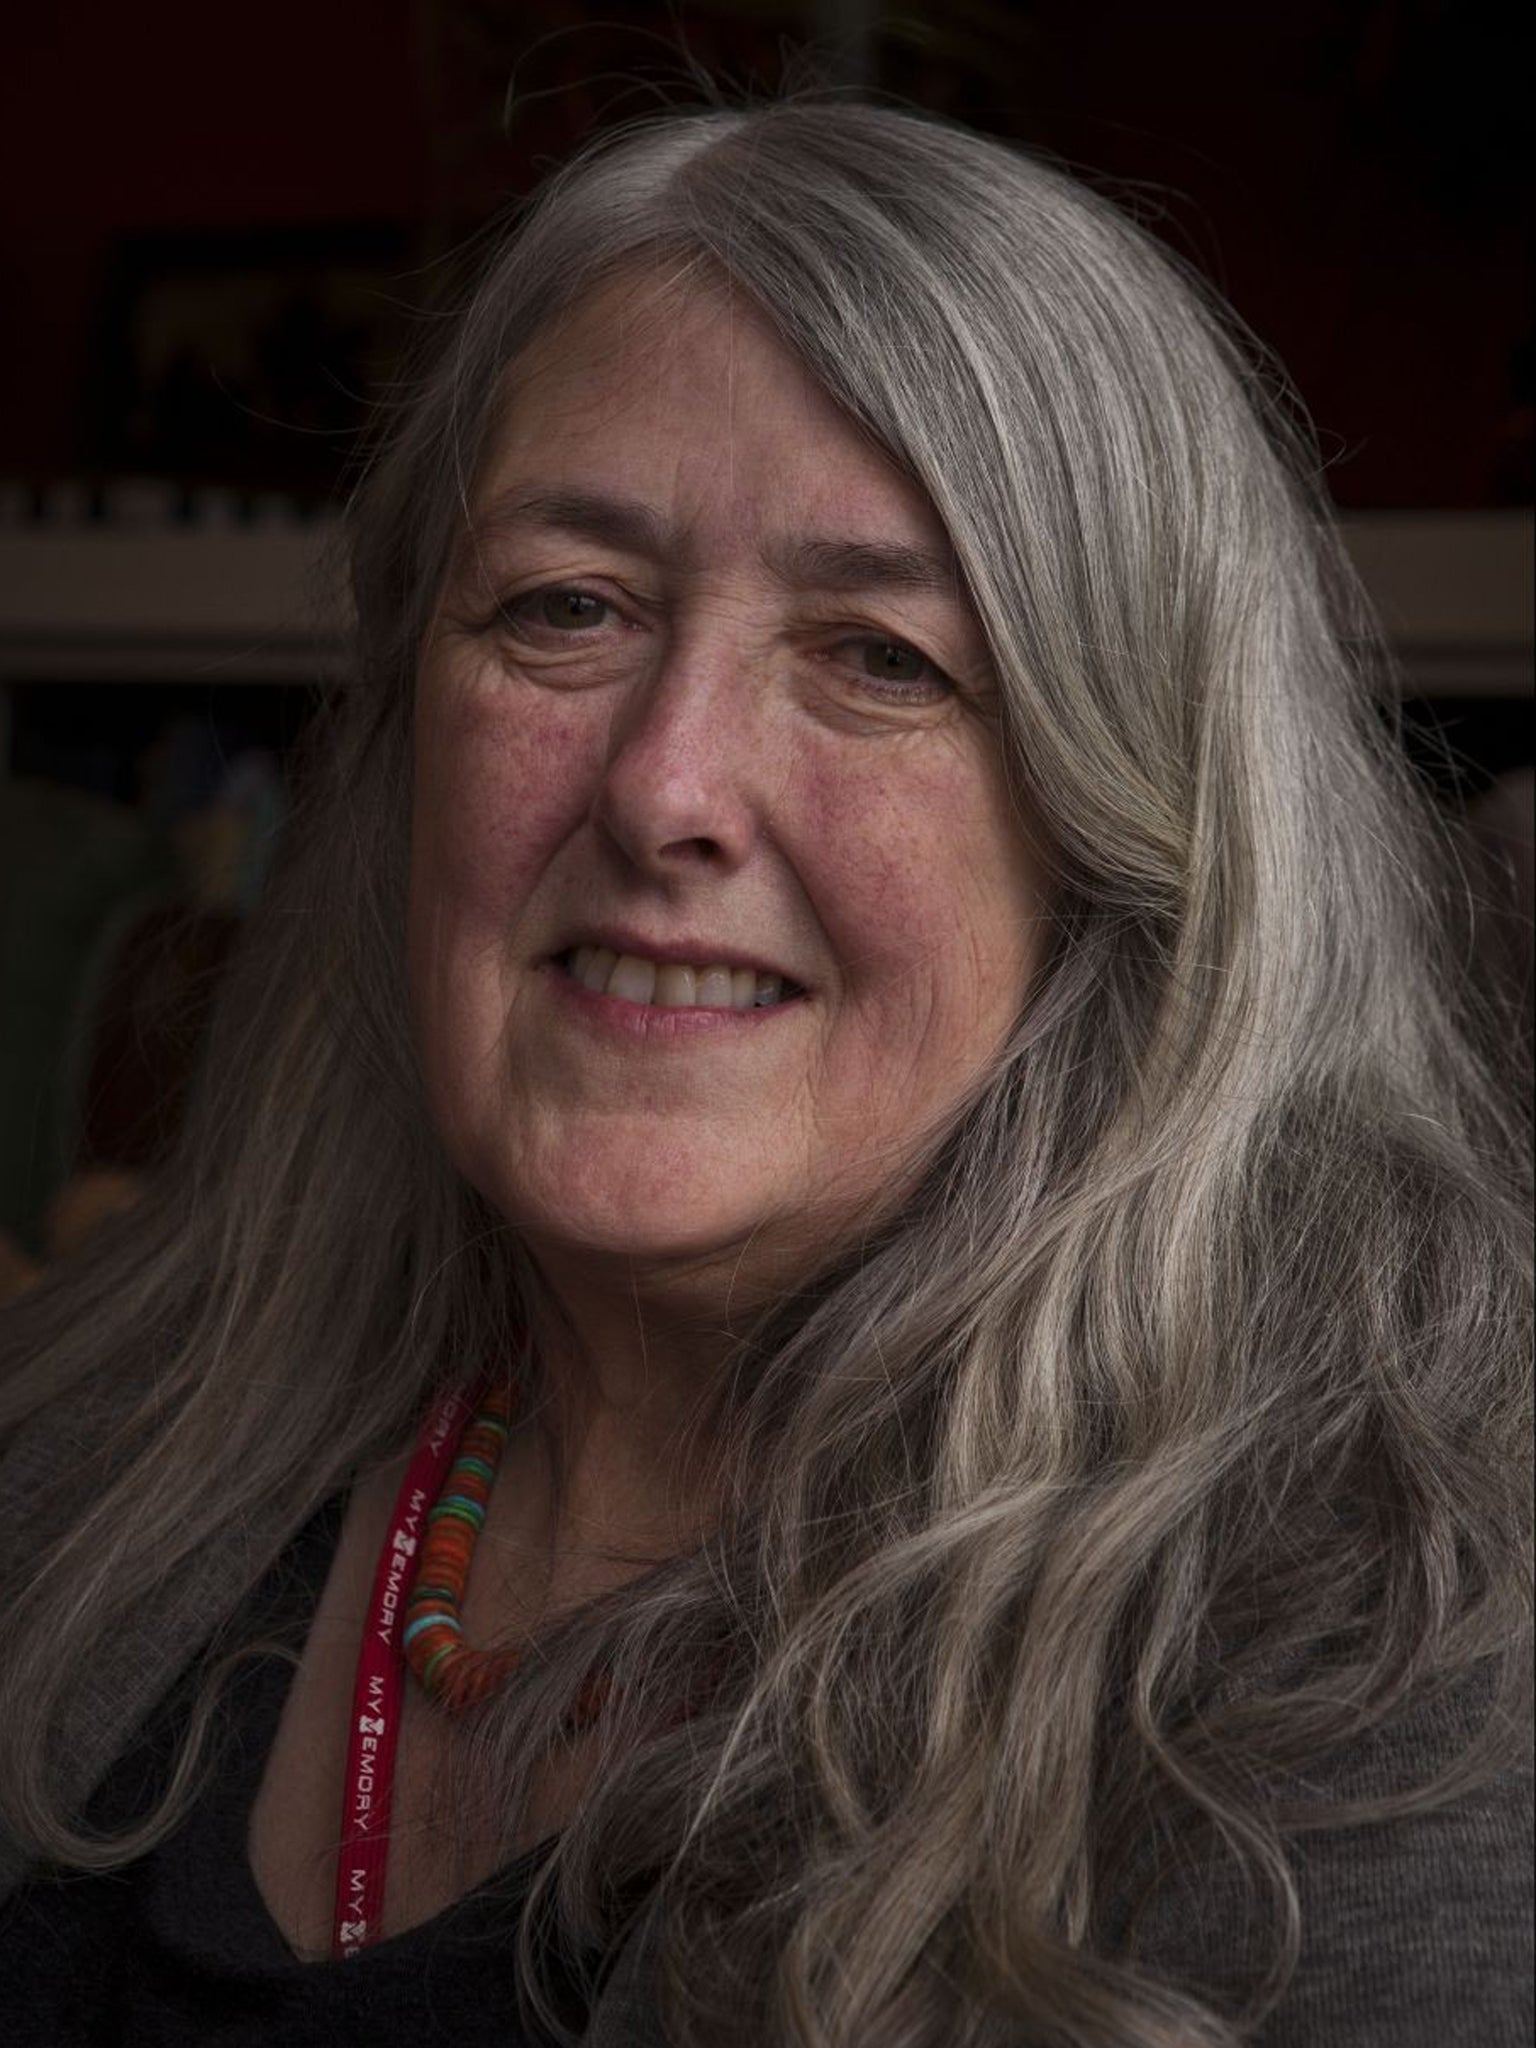 Mary Beard, who is professor of classics at the University of Cambridge, has written and presented several popular BBC Two documentaries on Roman history